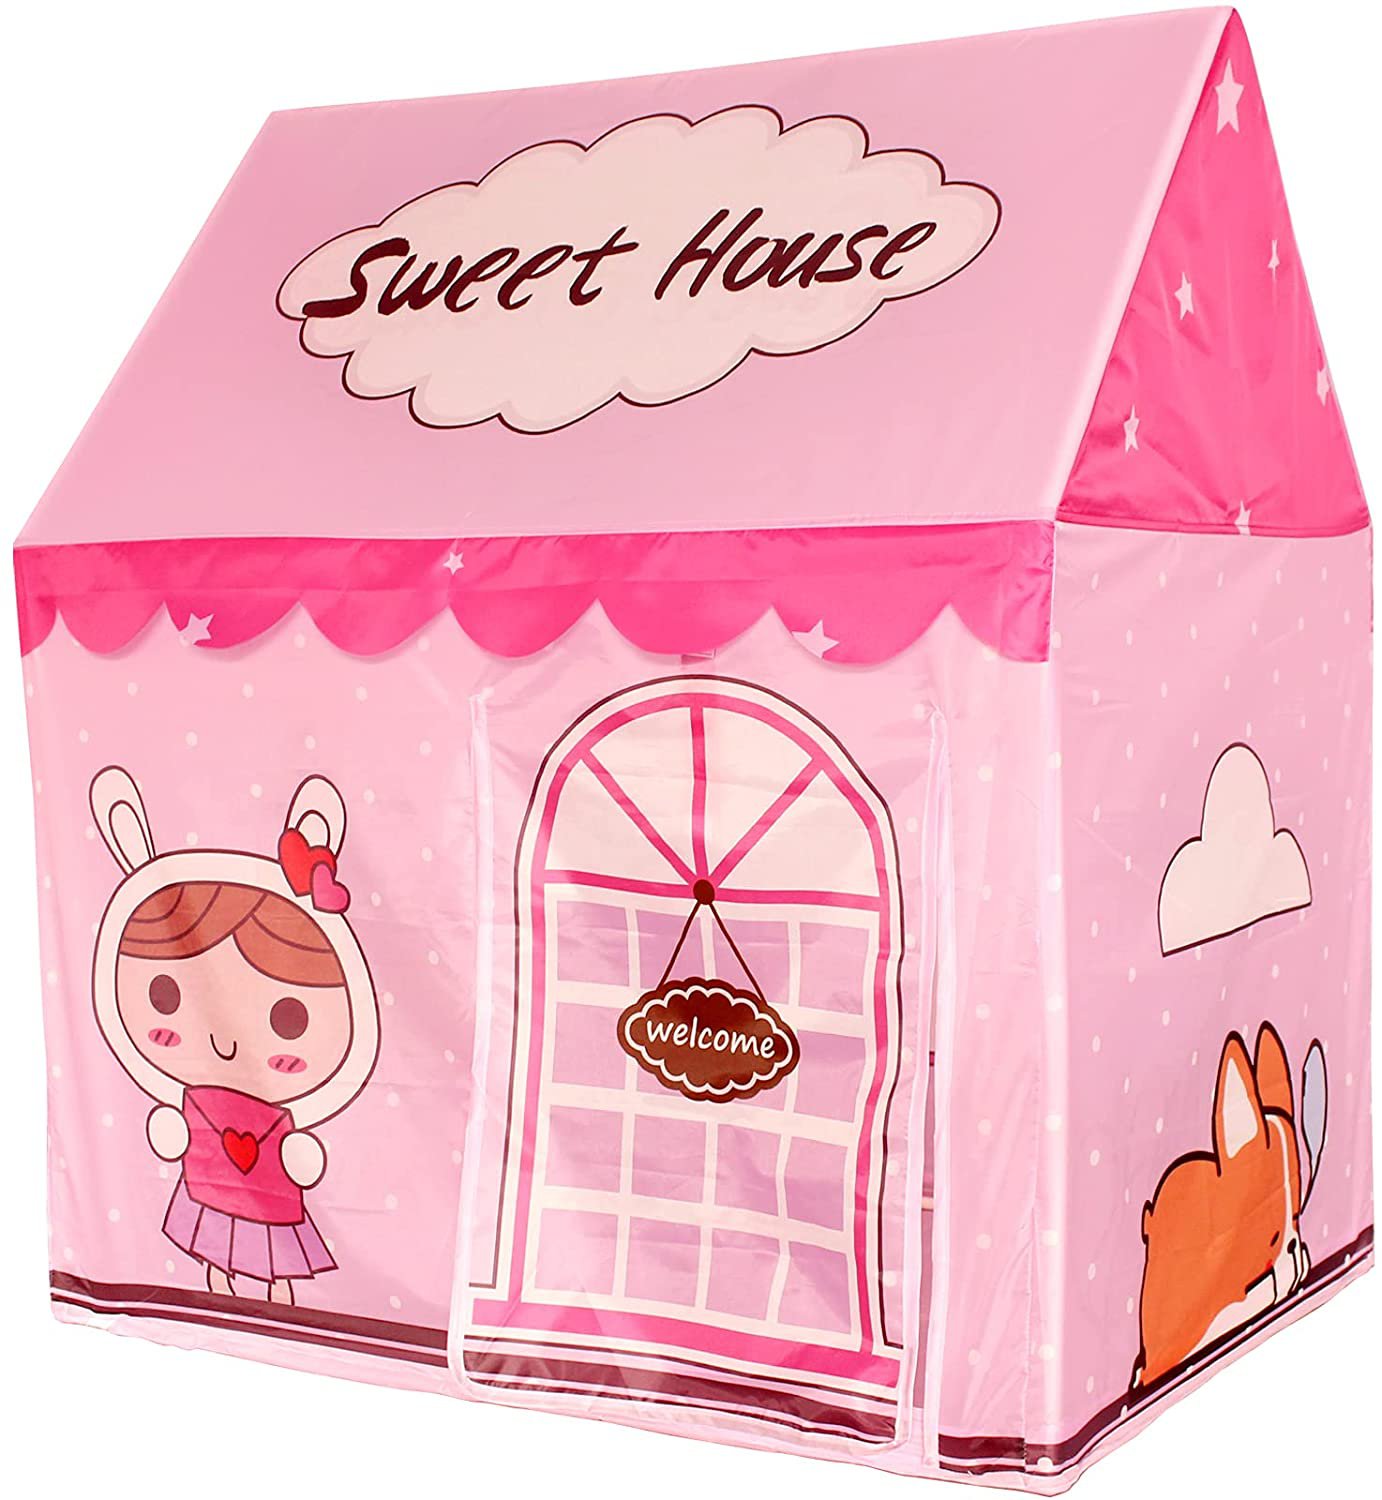 Sweethouse Tent Kids Play Tents for girls For little princess School Toys for Indoor and Outdoor